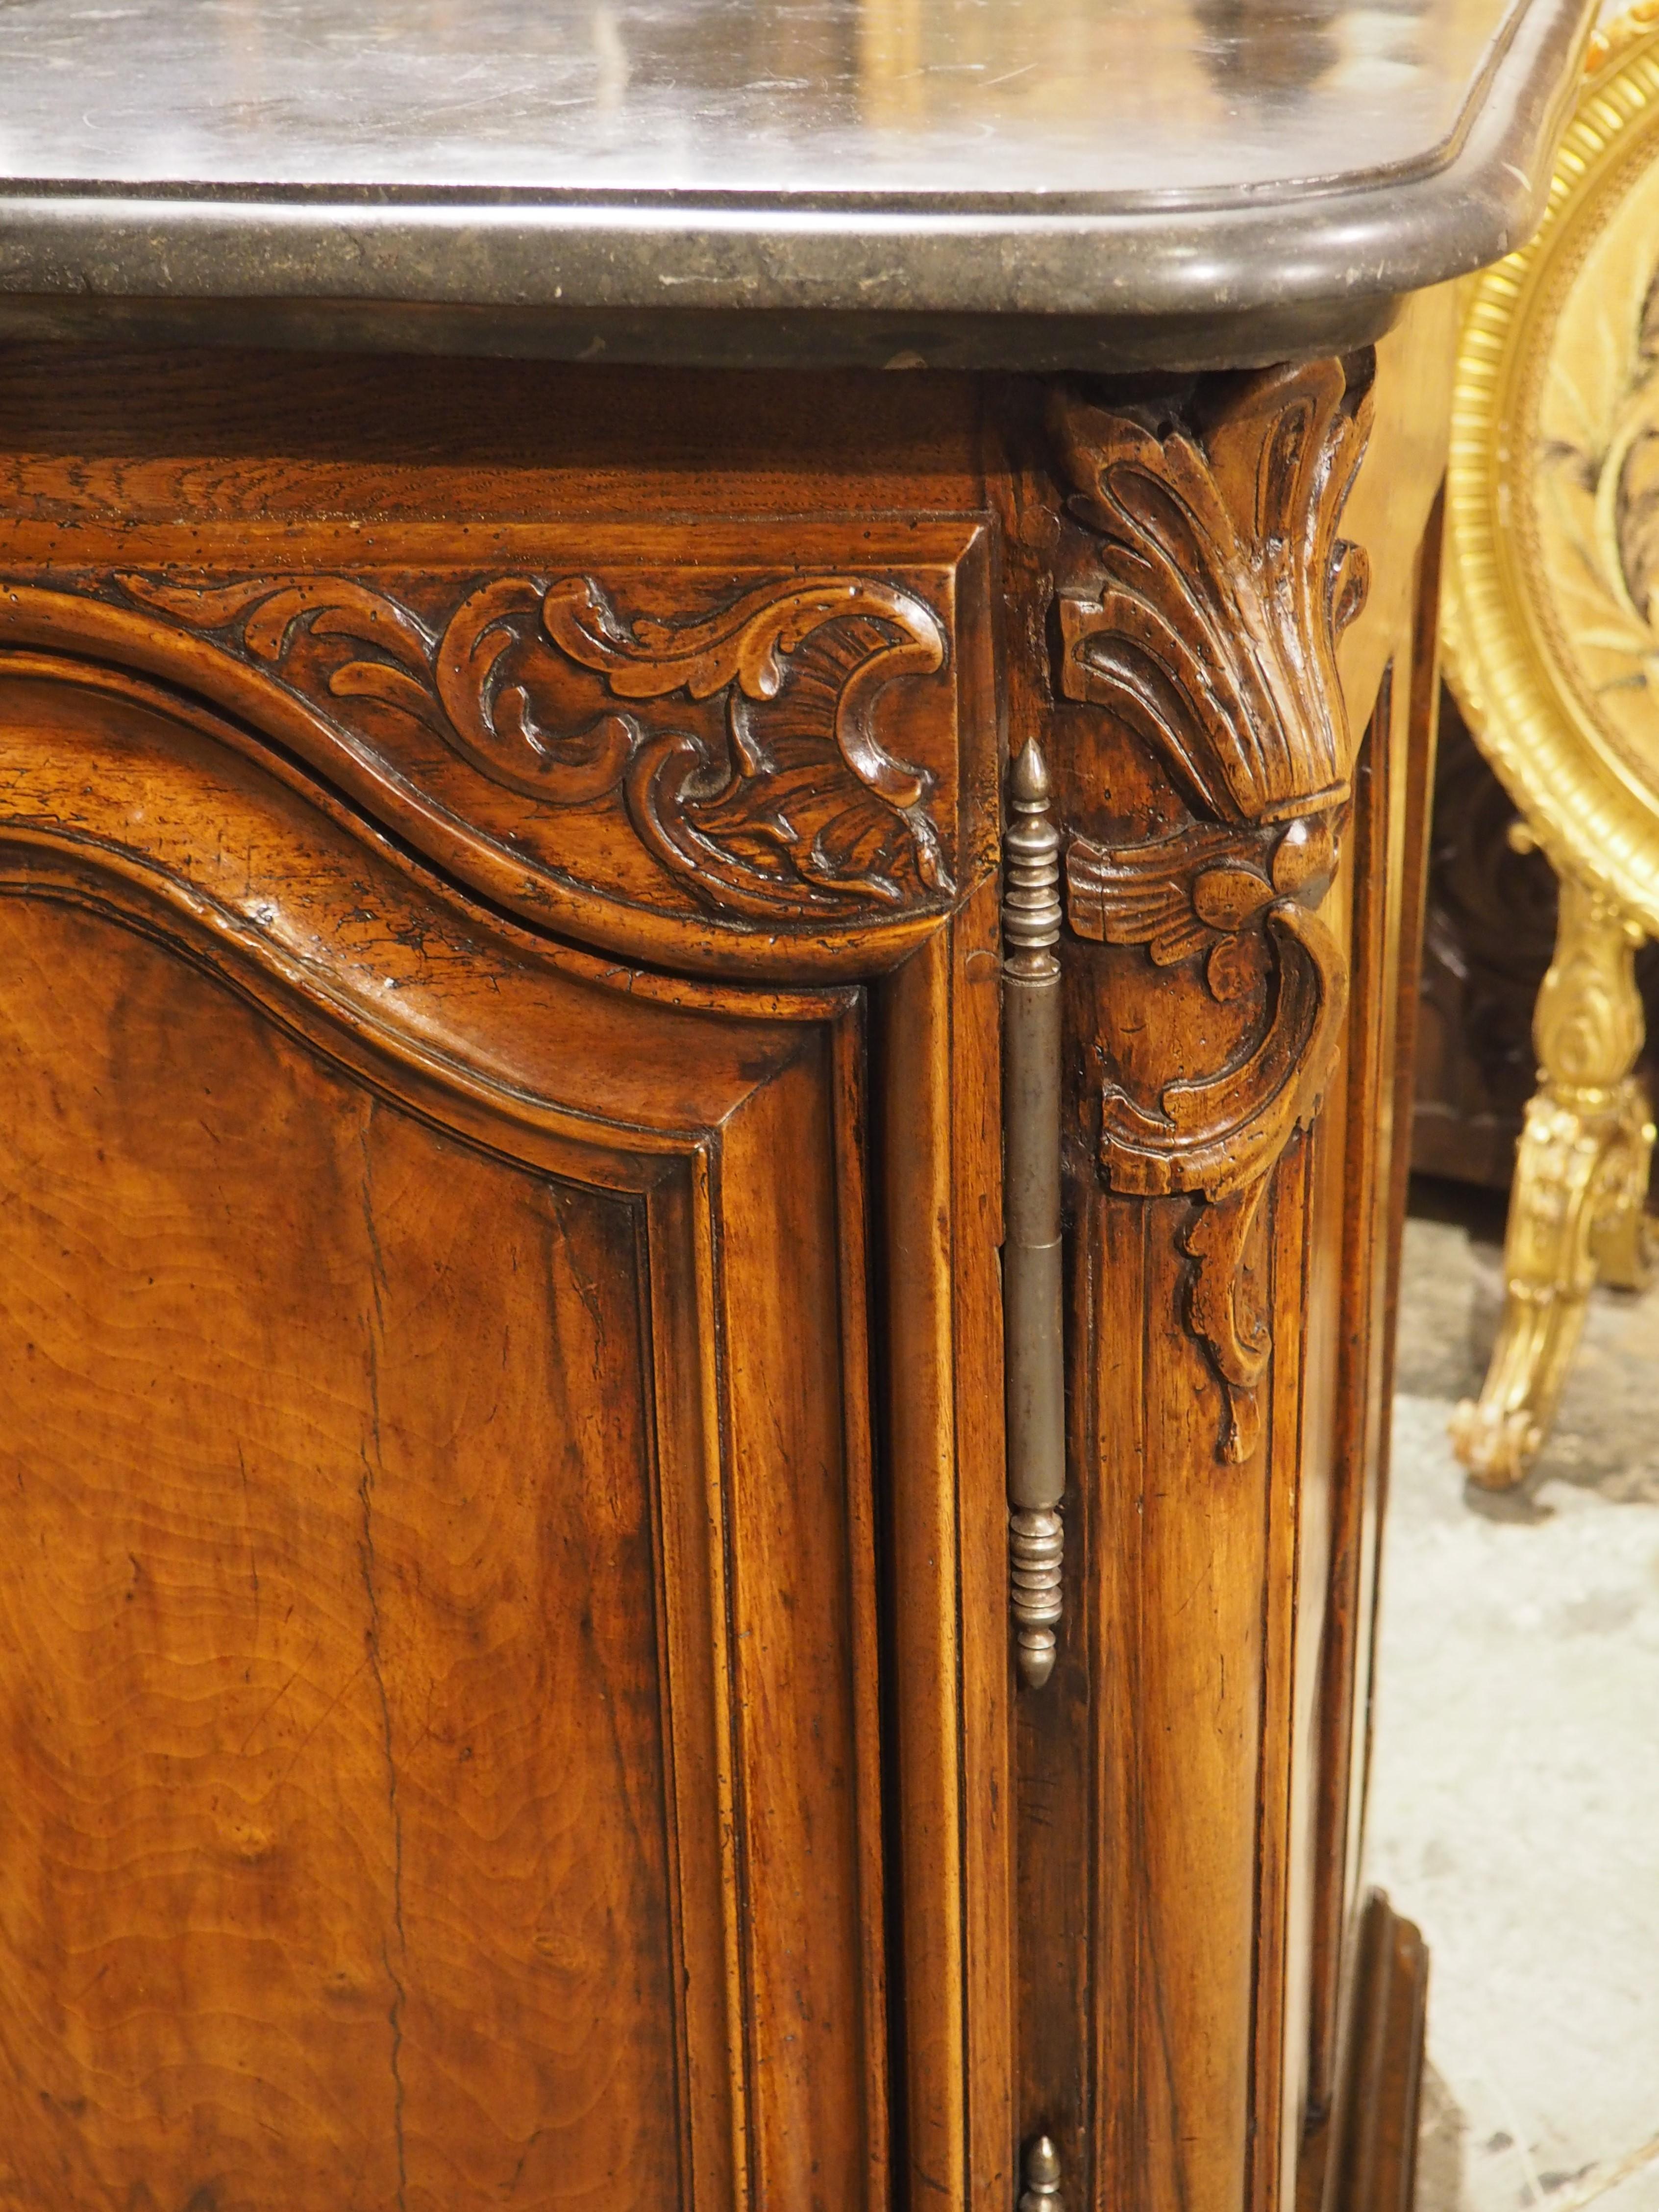 A rare find in today’s day and age, this walnut buffet with original pierre de st cyr stone top is in exceptional condition. Hand-carved circa 1715 in Lyon, France, this wonderful buffet has a deep, rich brown patina, offset by a black marble with